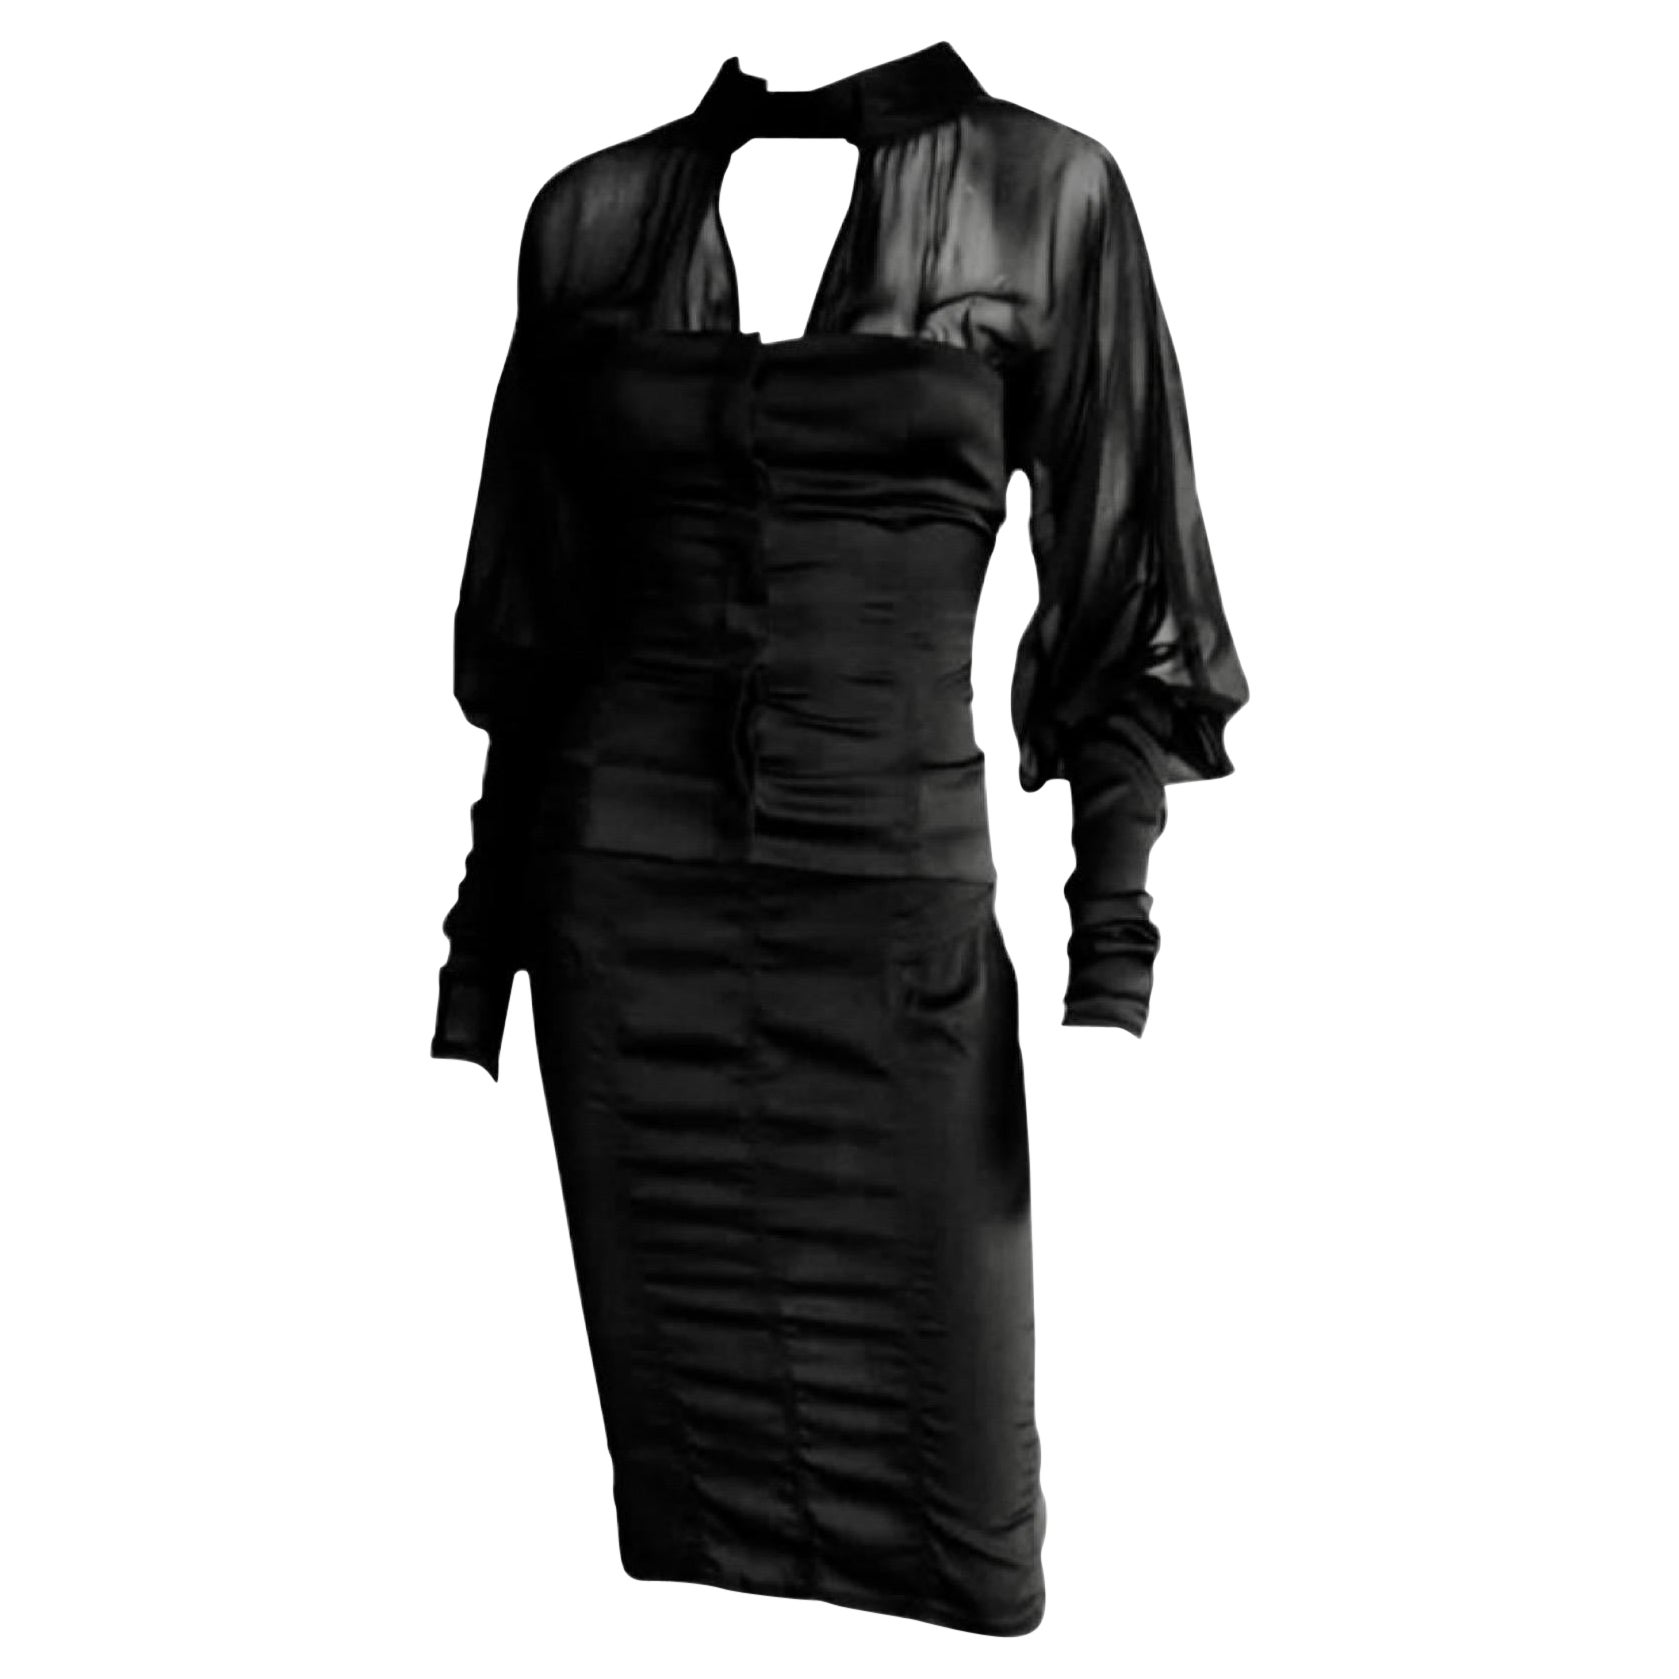 Tom Ford for Gucci F/W 2003 Jacket Top & Skirt Suit Black 2 Piece Set Ensemble For Sale